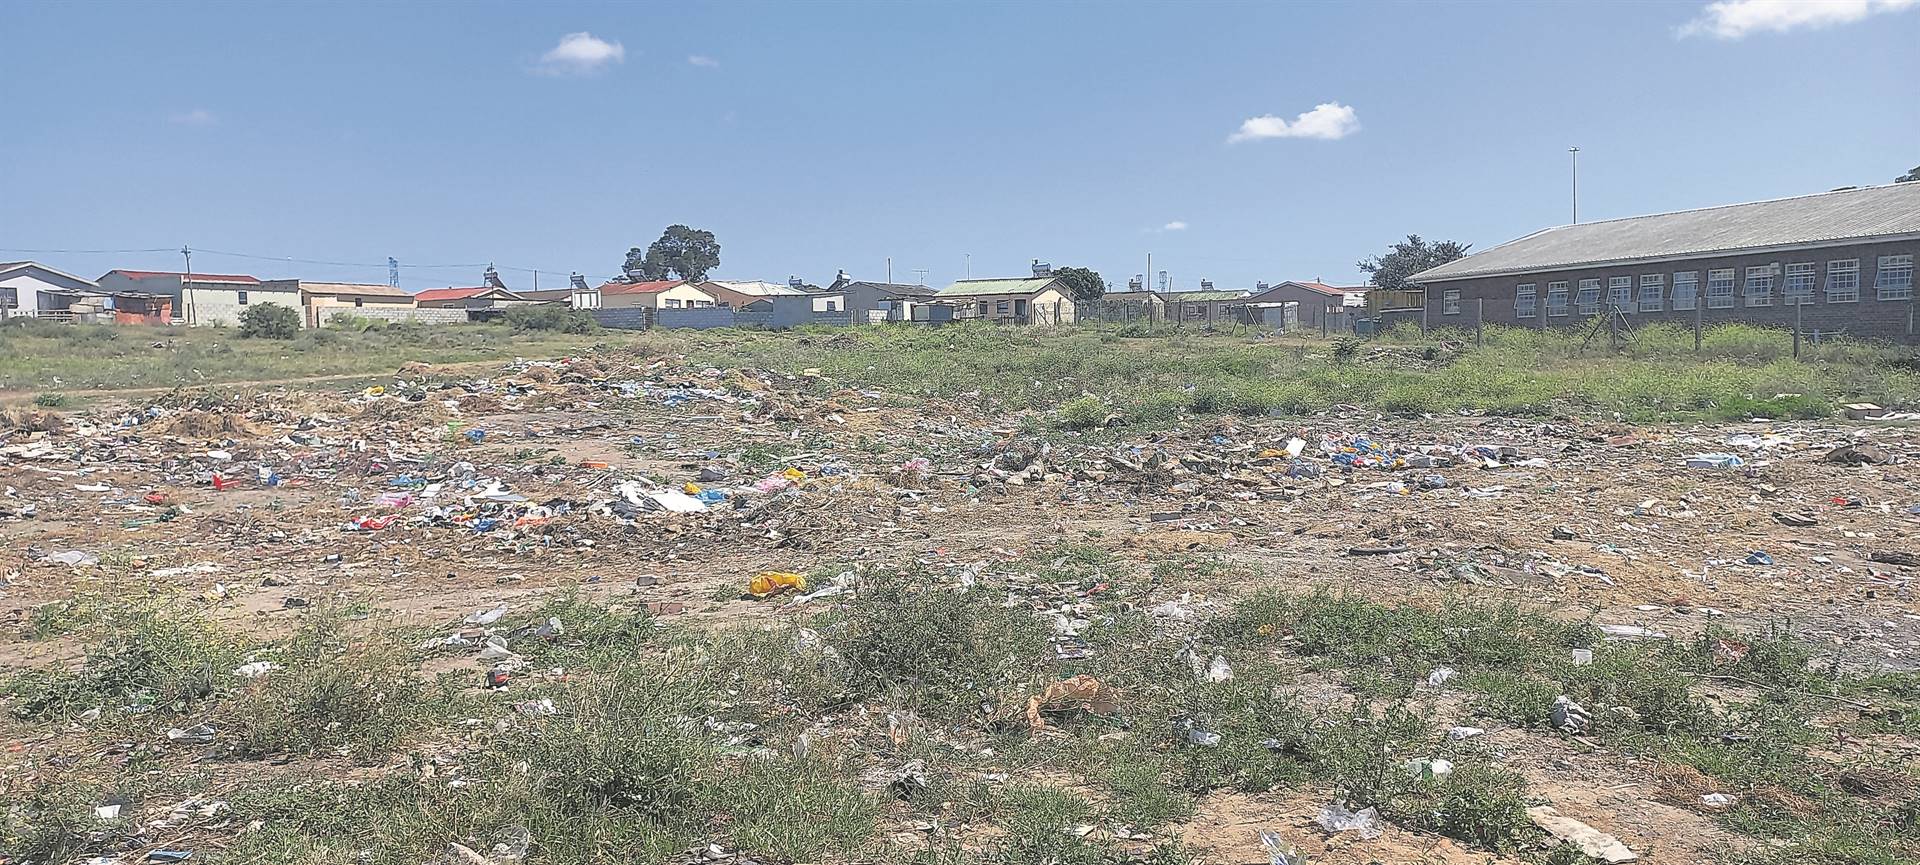 Rubbish piles up in open spaces in Nelson Mandela Bay.                                                 Photo by Luvuyo Mehlwana